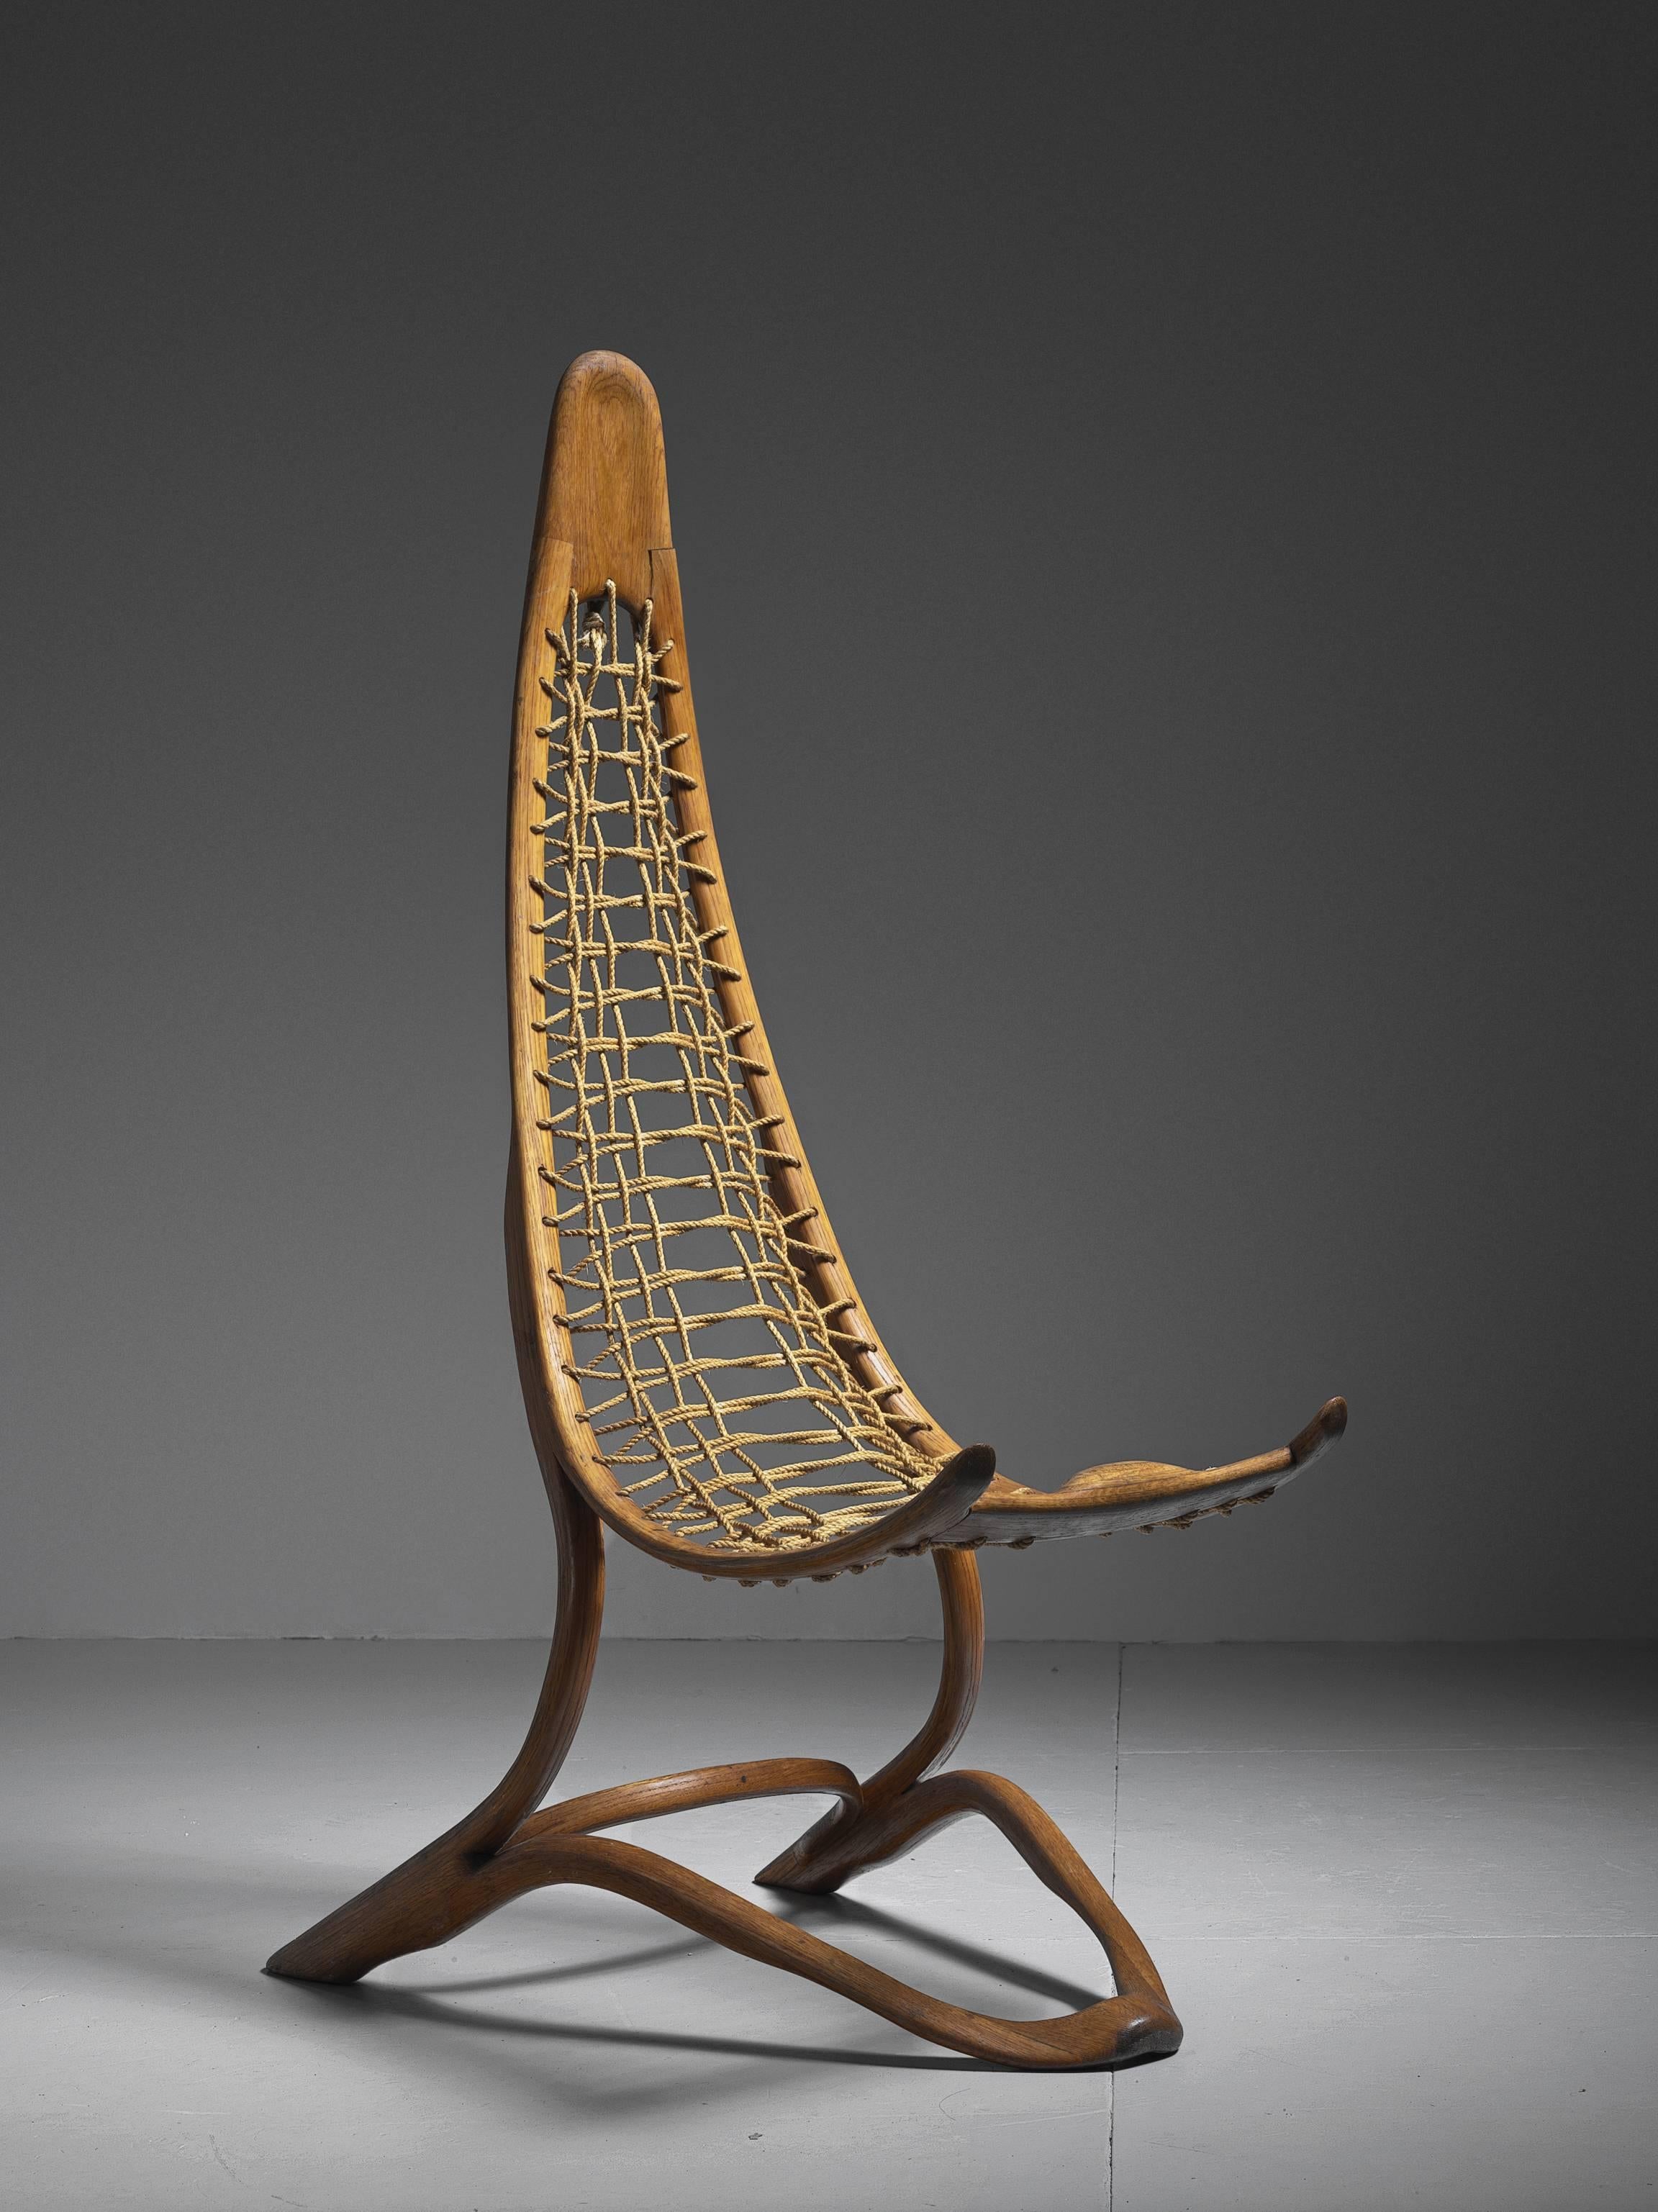 This amazing art piece or object chair combines ultimate woodworking skills and design quality. To create this large bow like bent plywood frame requires both knowledge of the material as the creativity to design this unique shape. The rough, woven